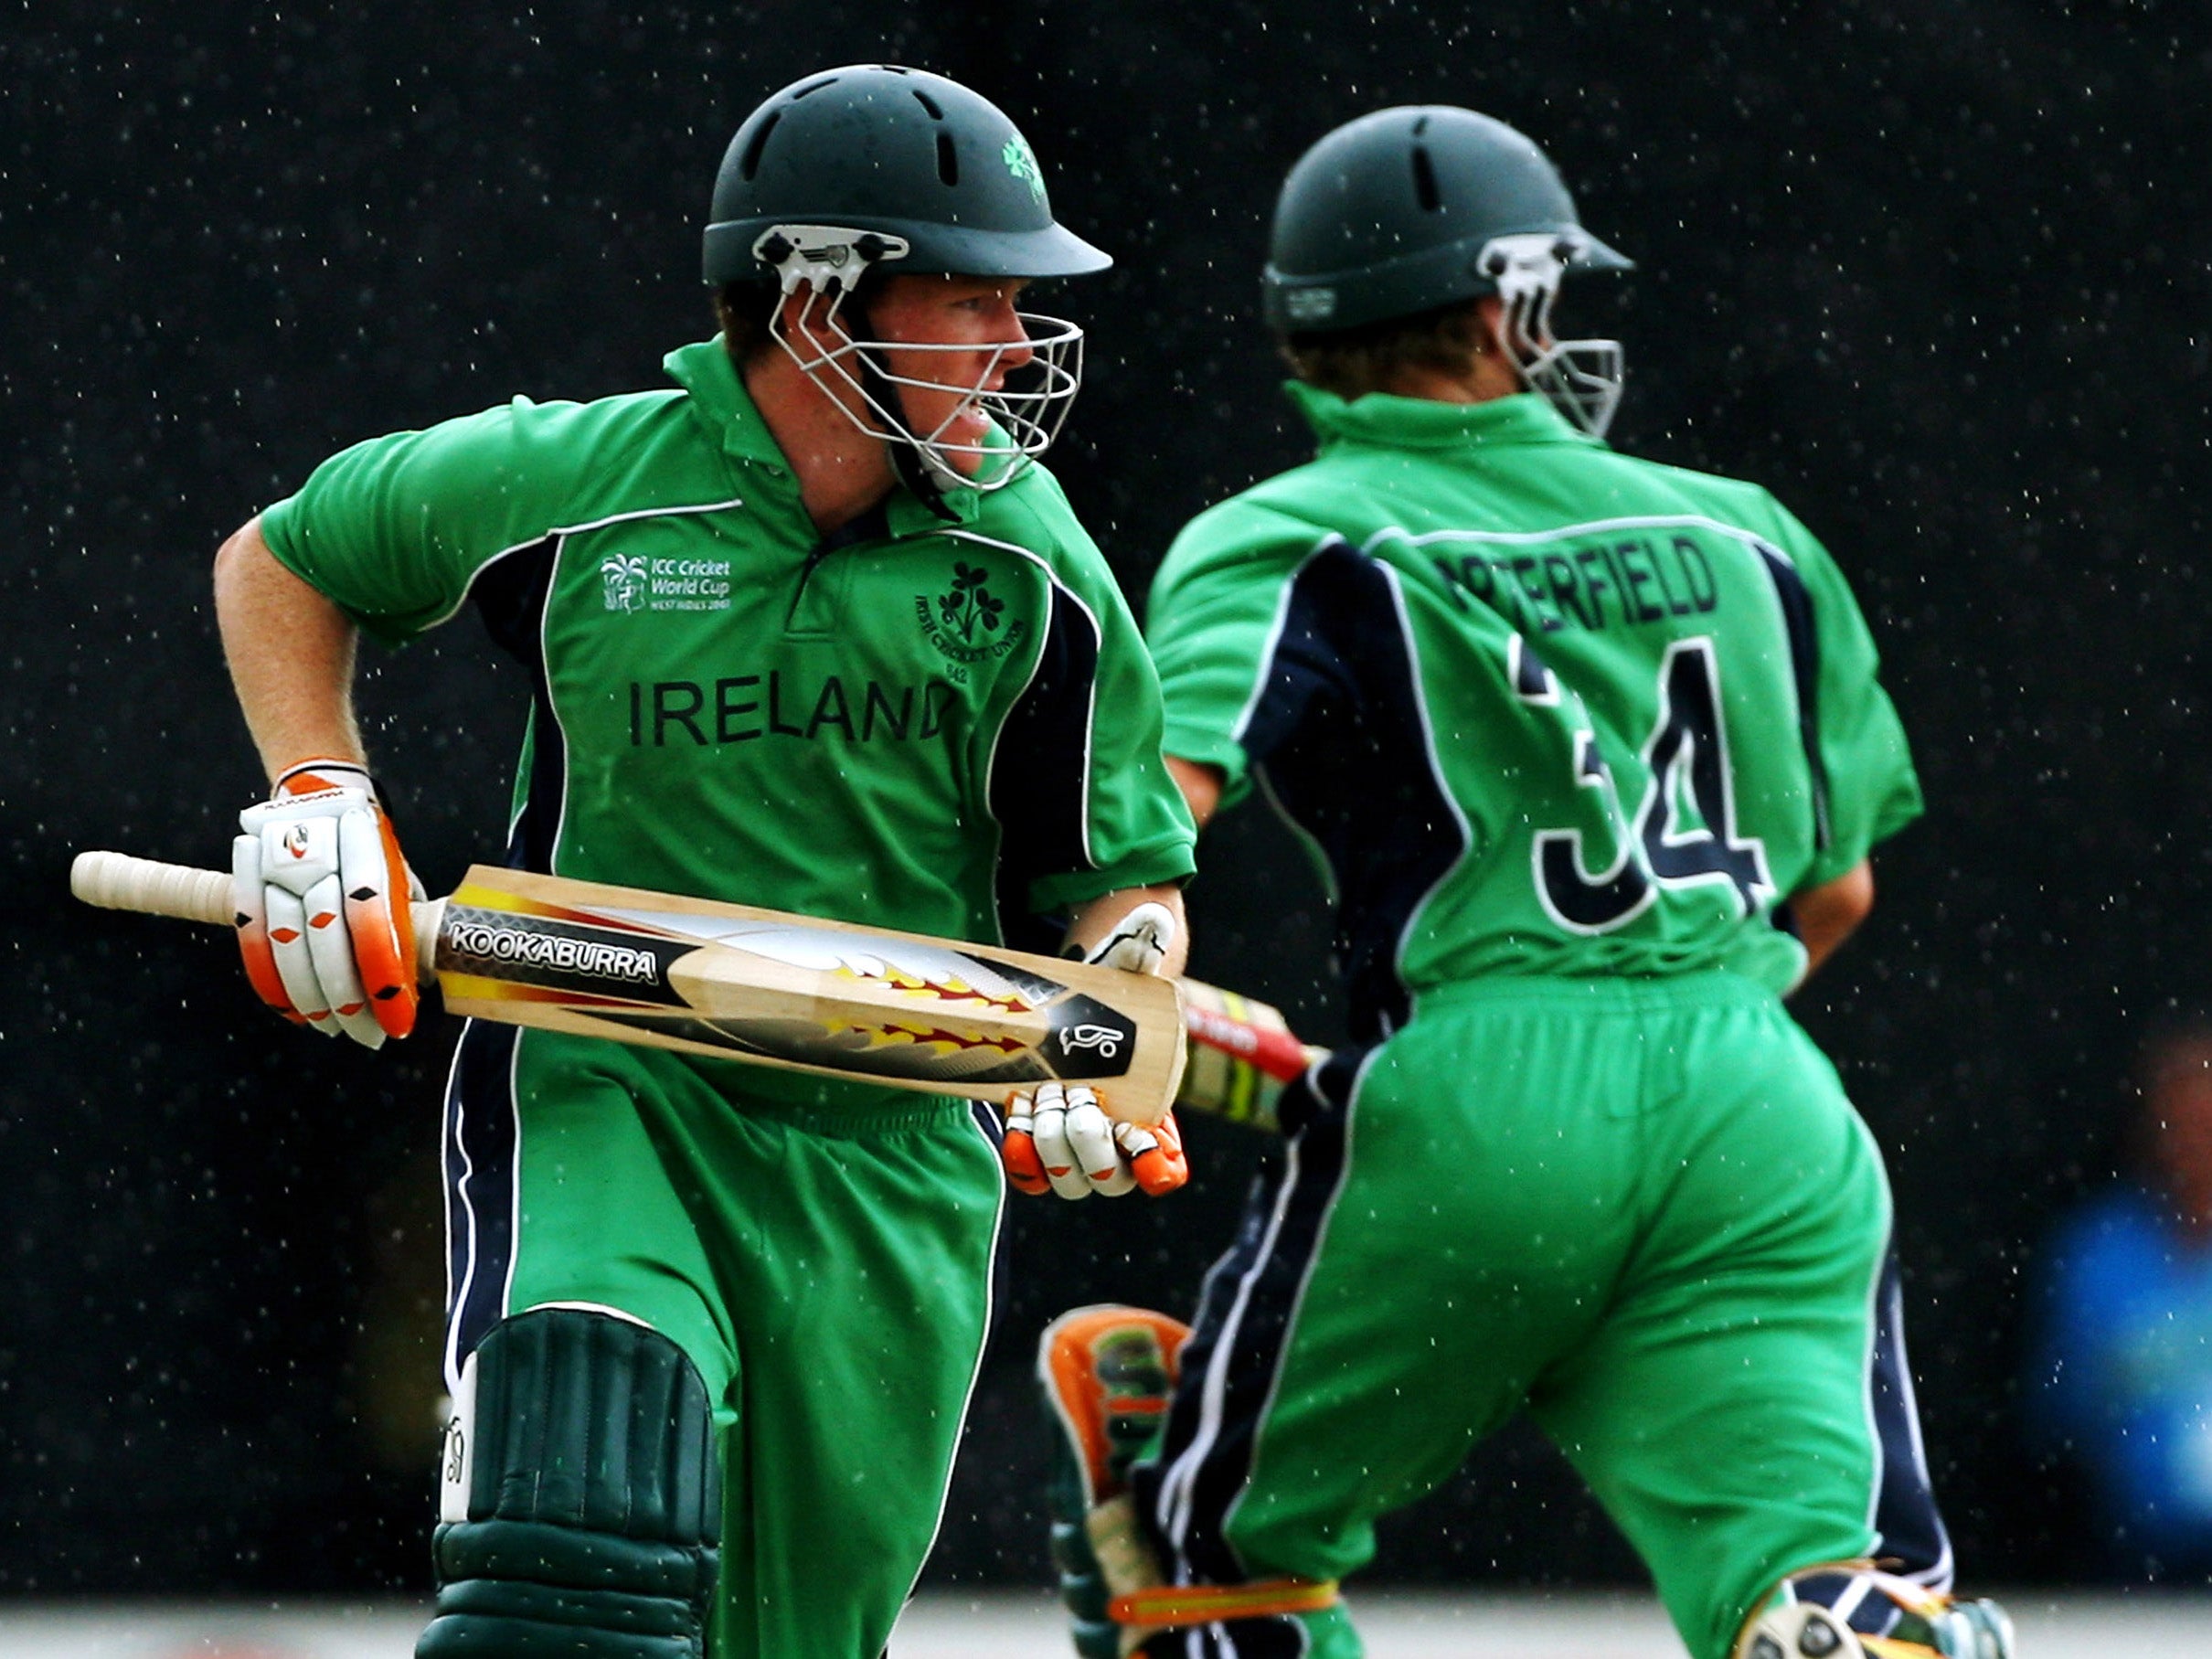 Eoin Morgan played 23 one-day internationals for Ireland before switching his allegiance to England